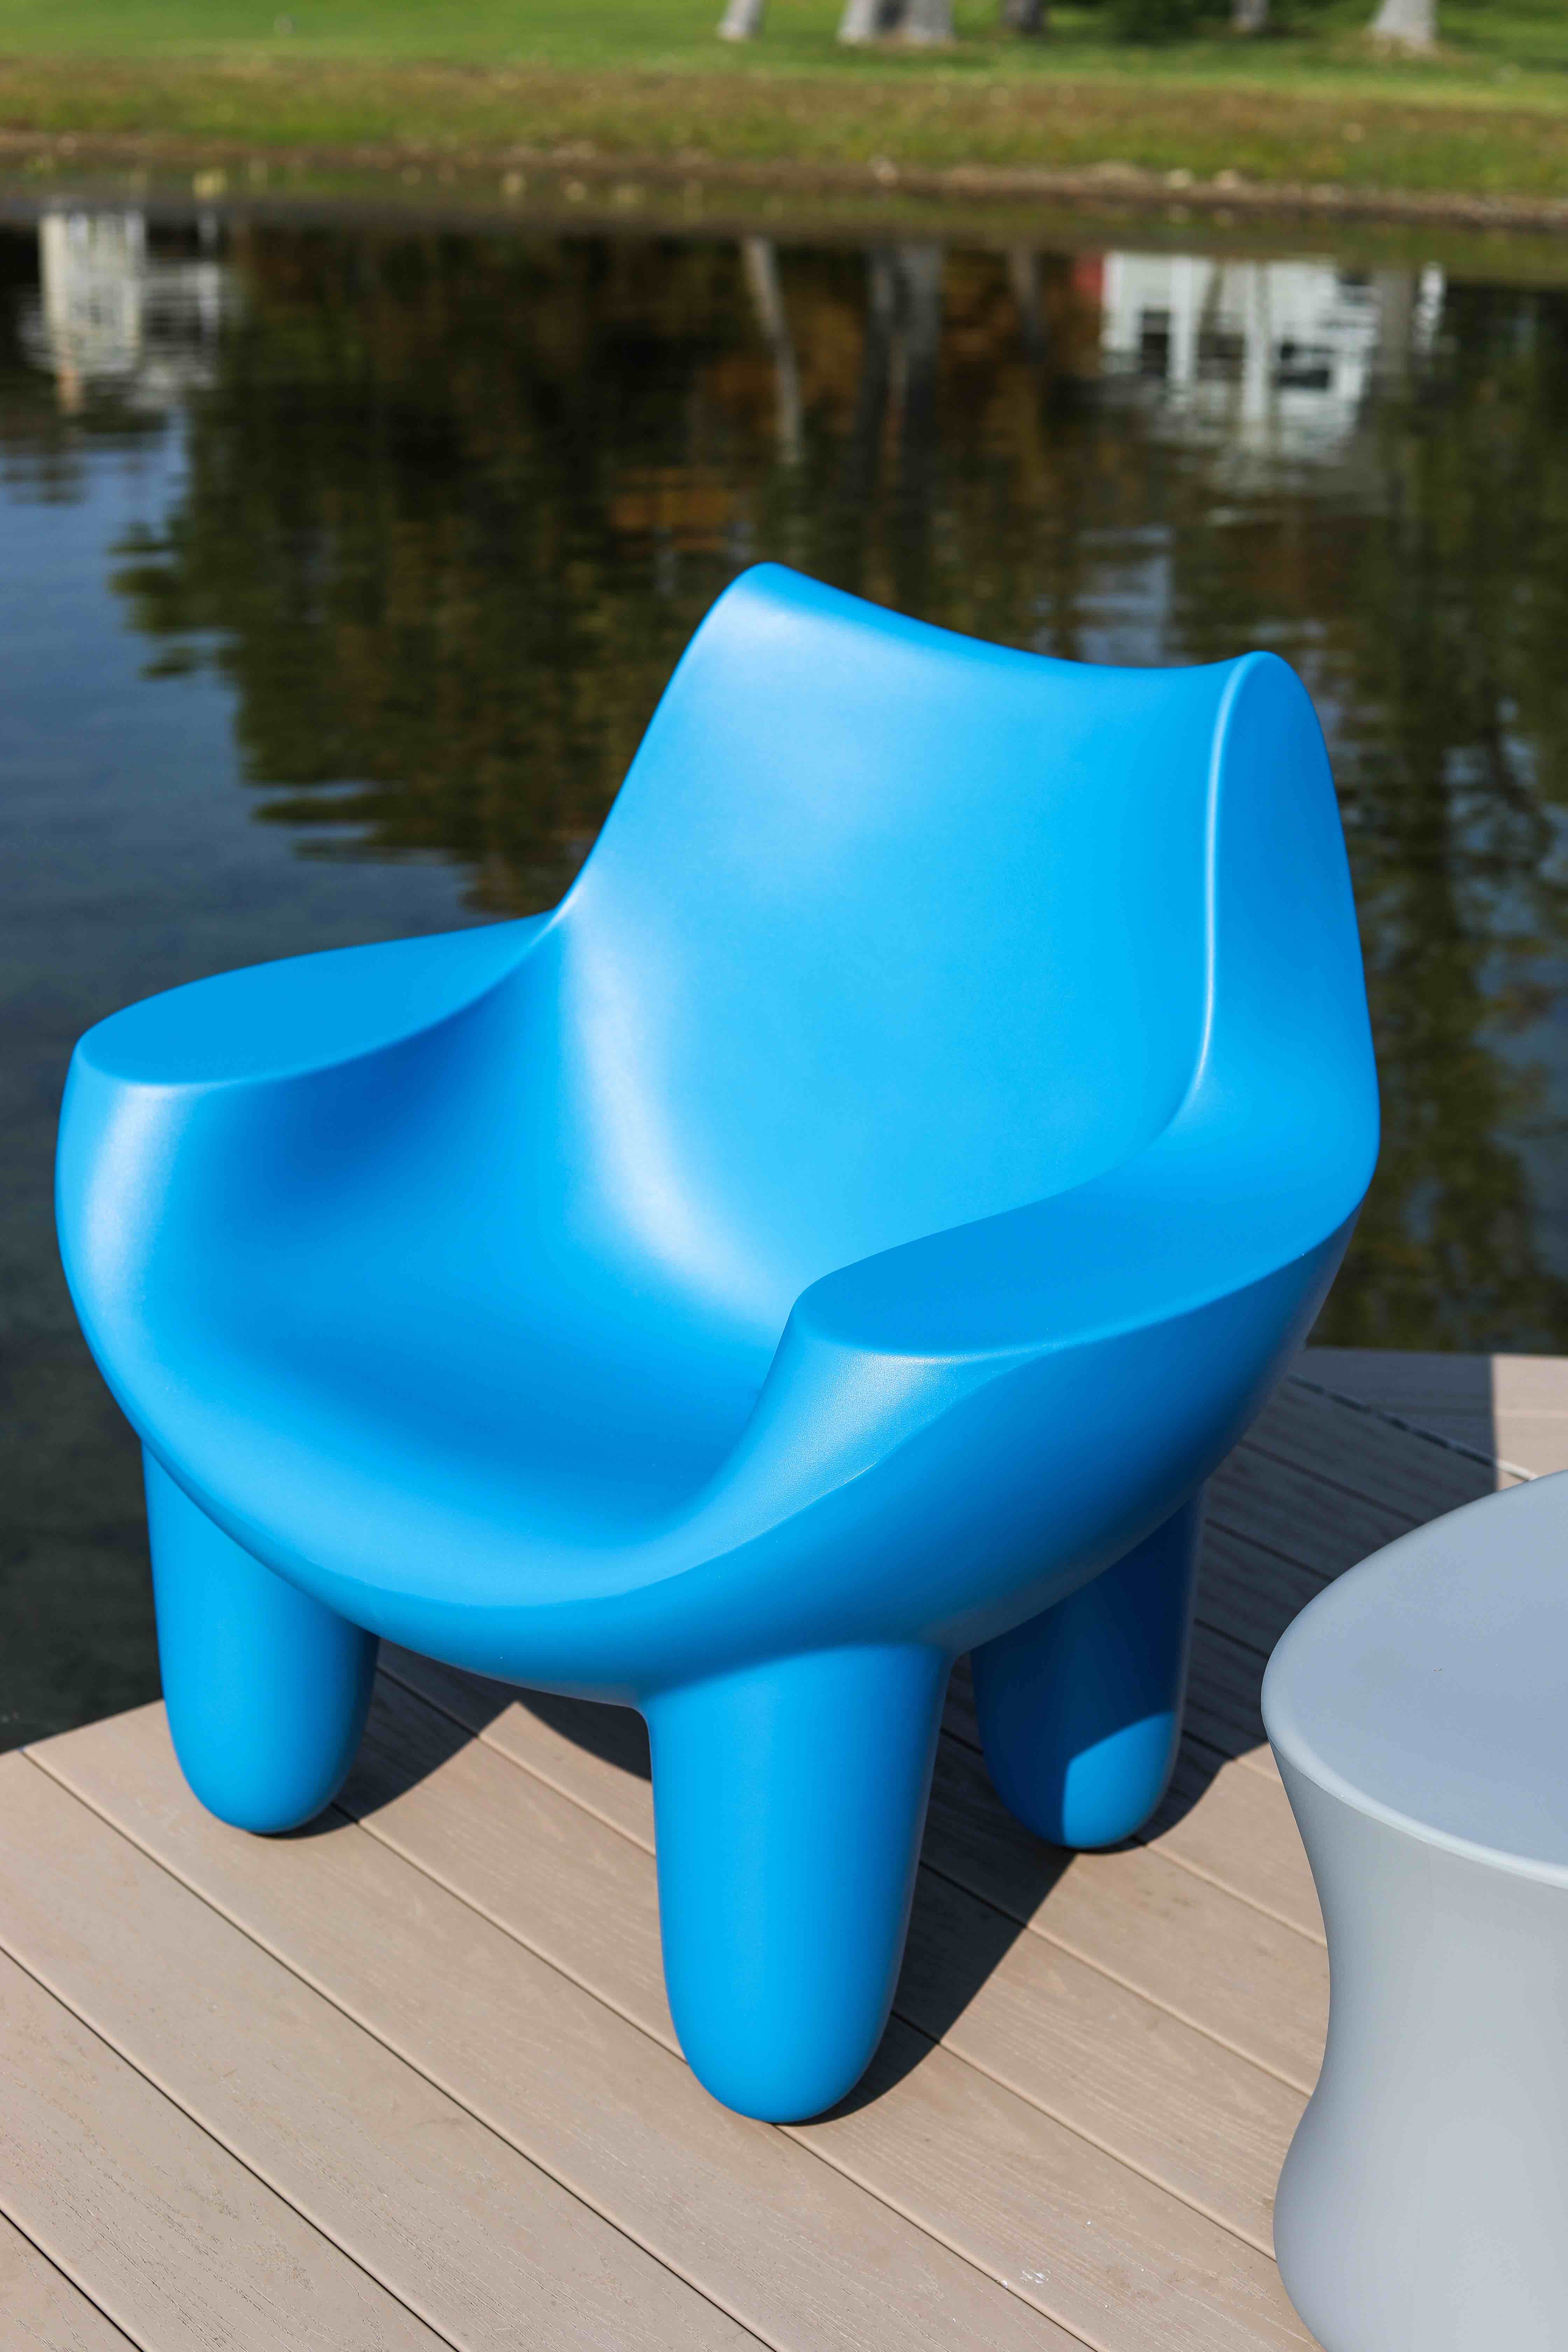 Mibster Chair front view on dock